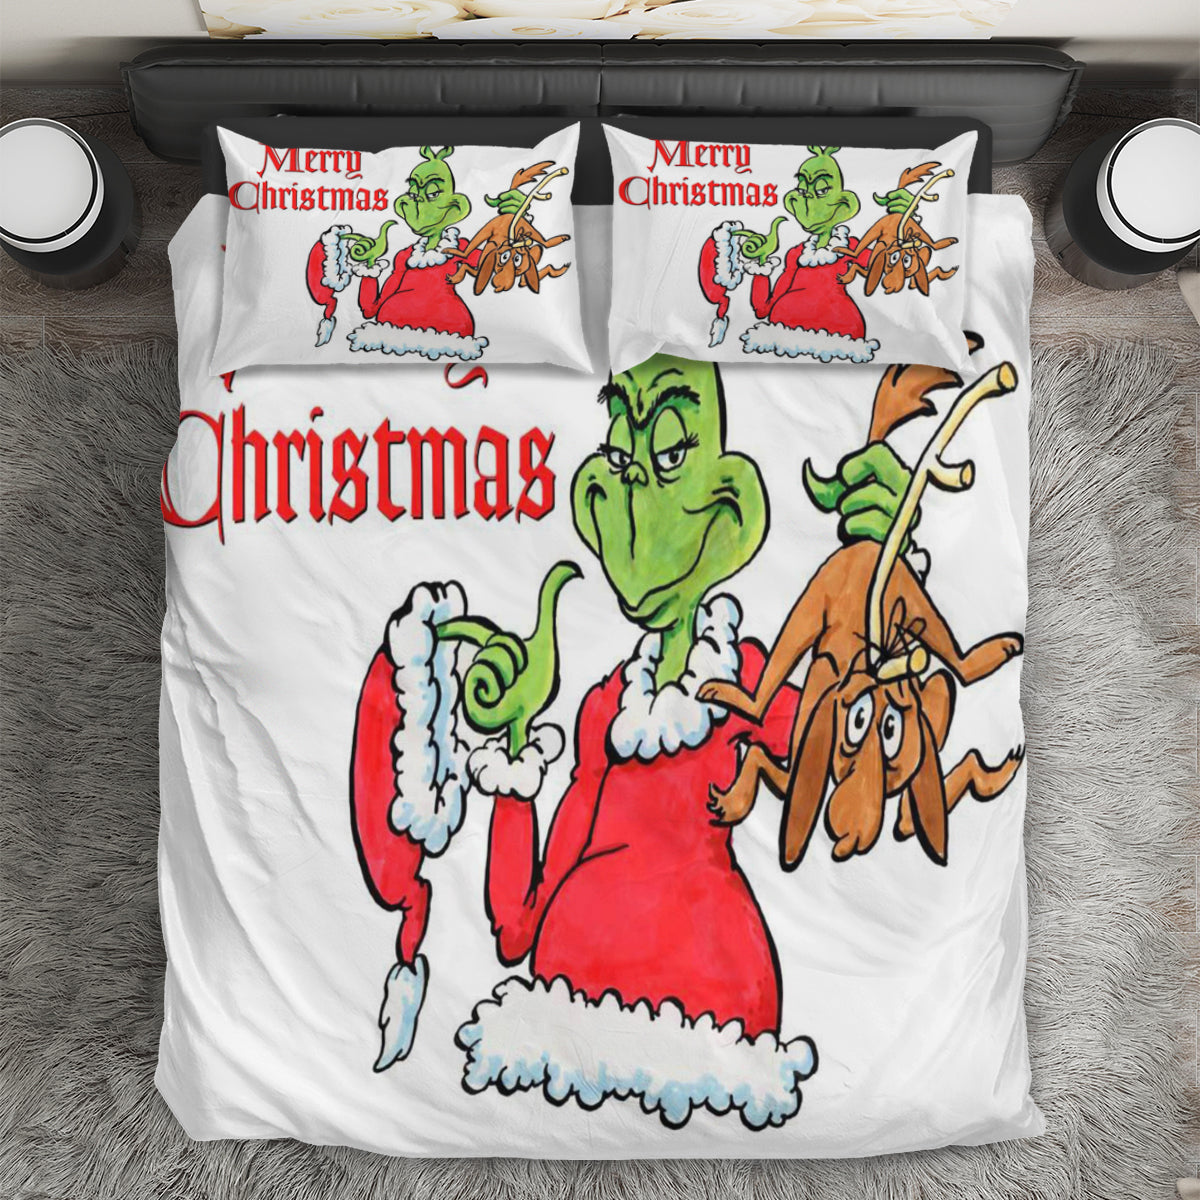 The Grinch Christmas Merry Xmas 2 3PCS Bedding Set Duvet Cover And Pillow Cases Gift For Fan